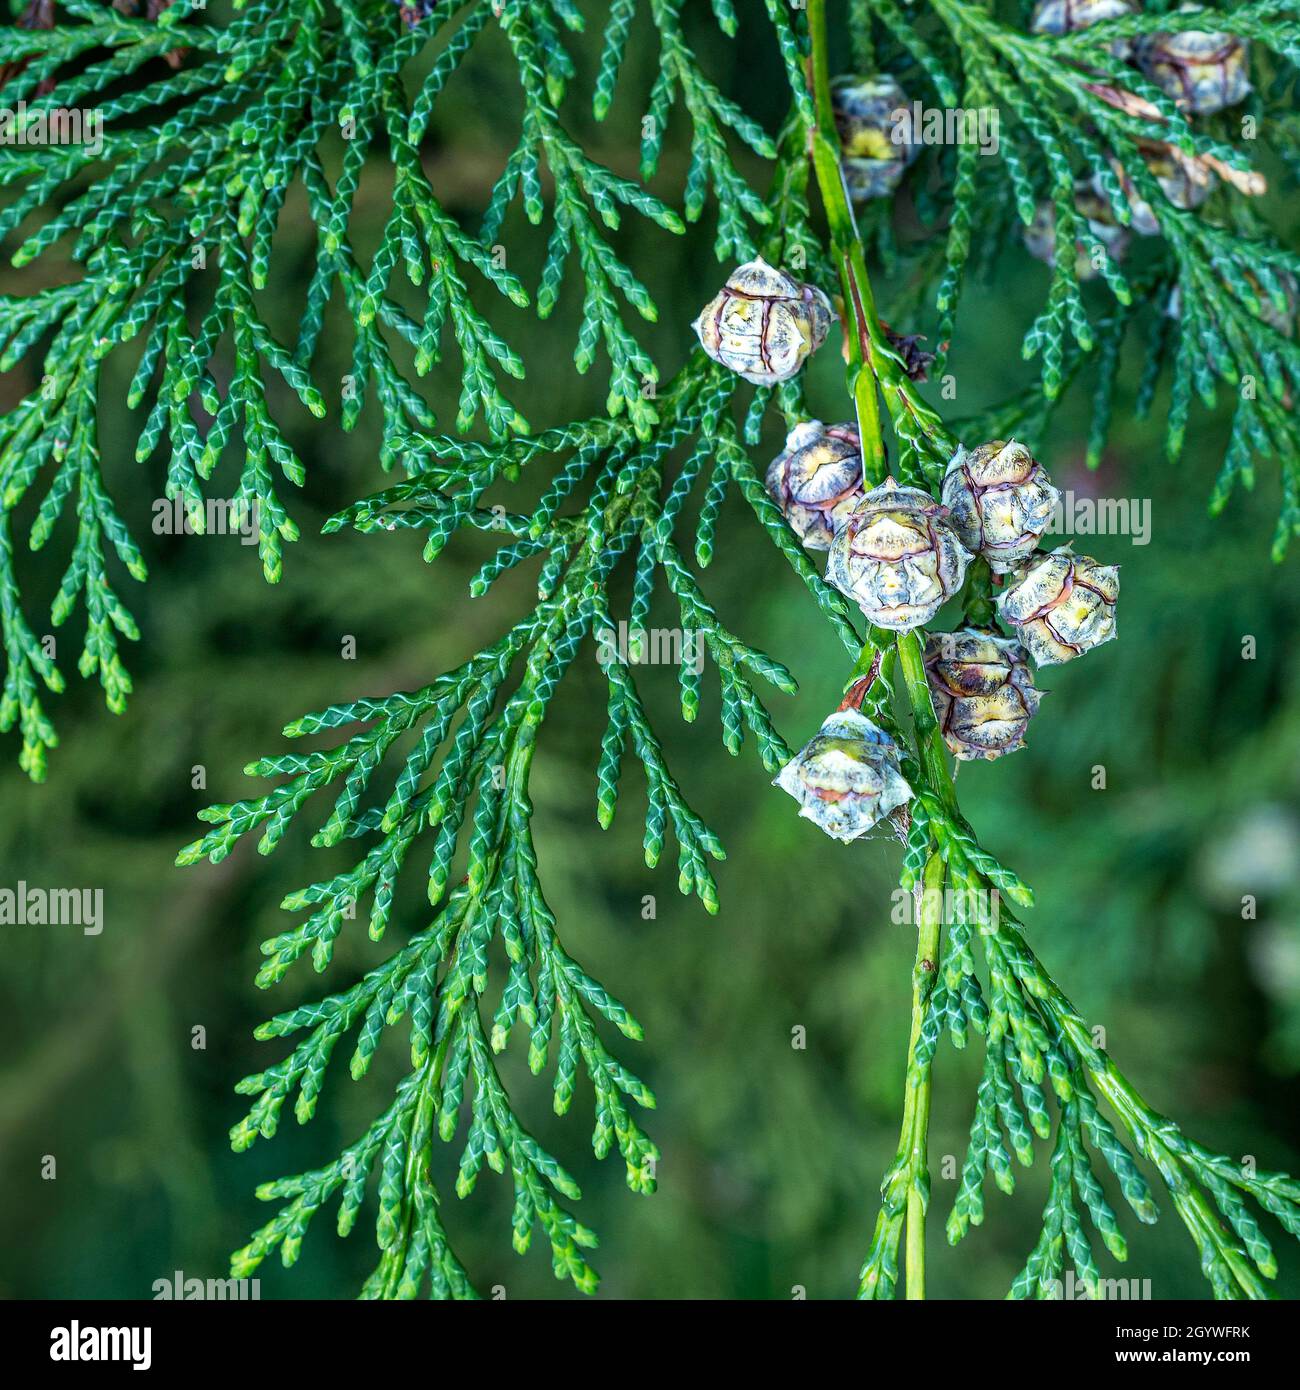 Leaves and cones of a Lawson cypress tree Stock Photo